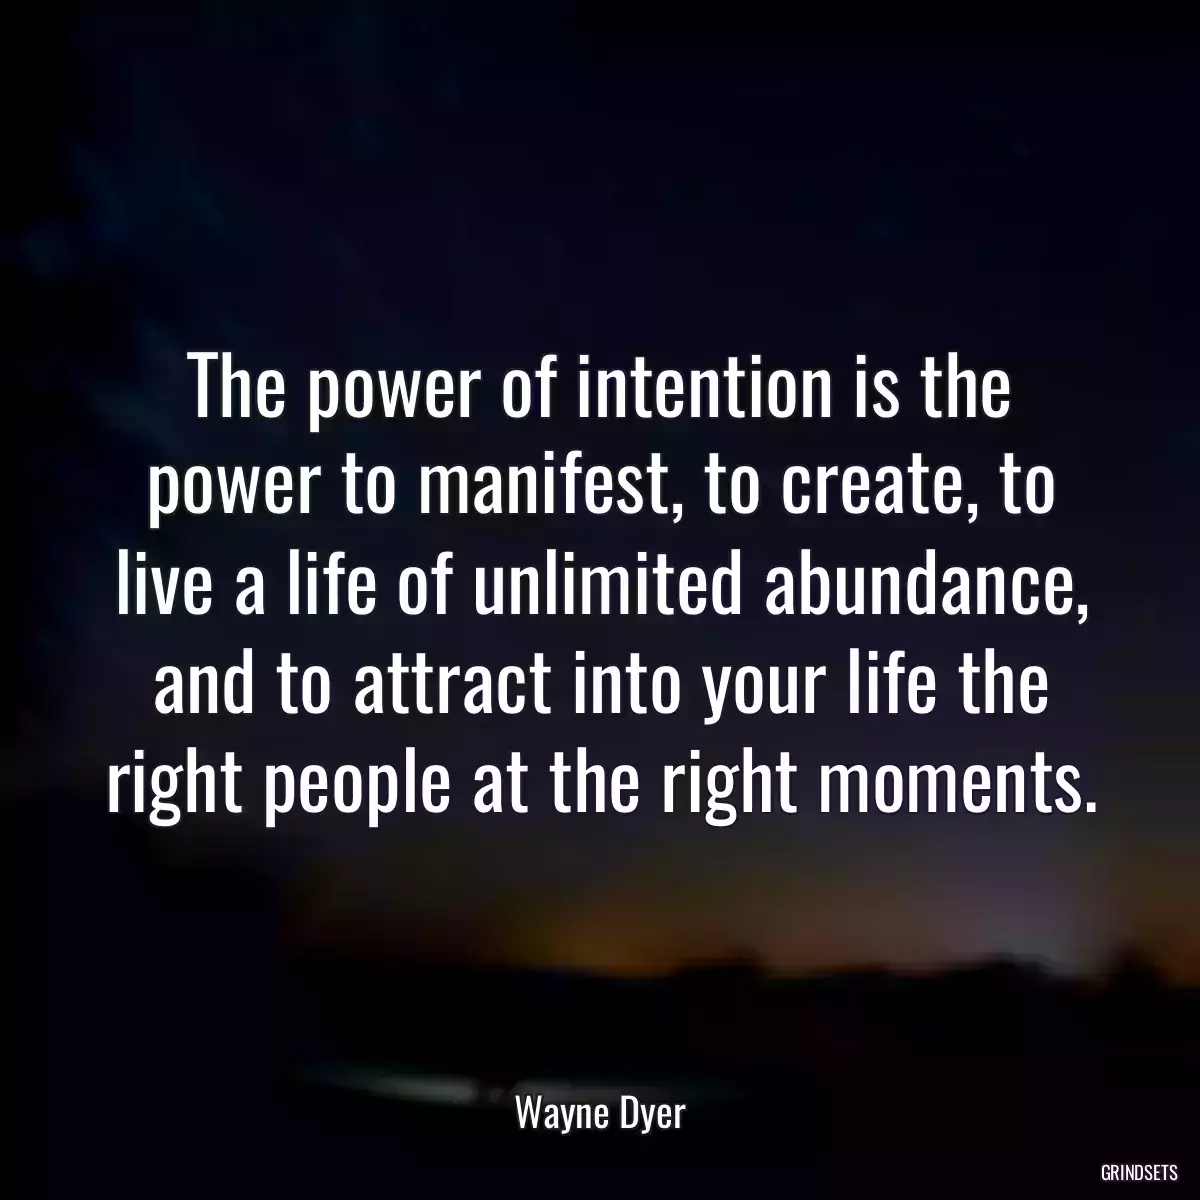 The power of intention is the power to manifest, to create, to live a life of unlimited abundance, and to attract into your life the right people at the right moments.